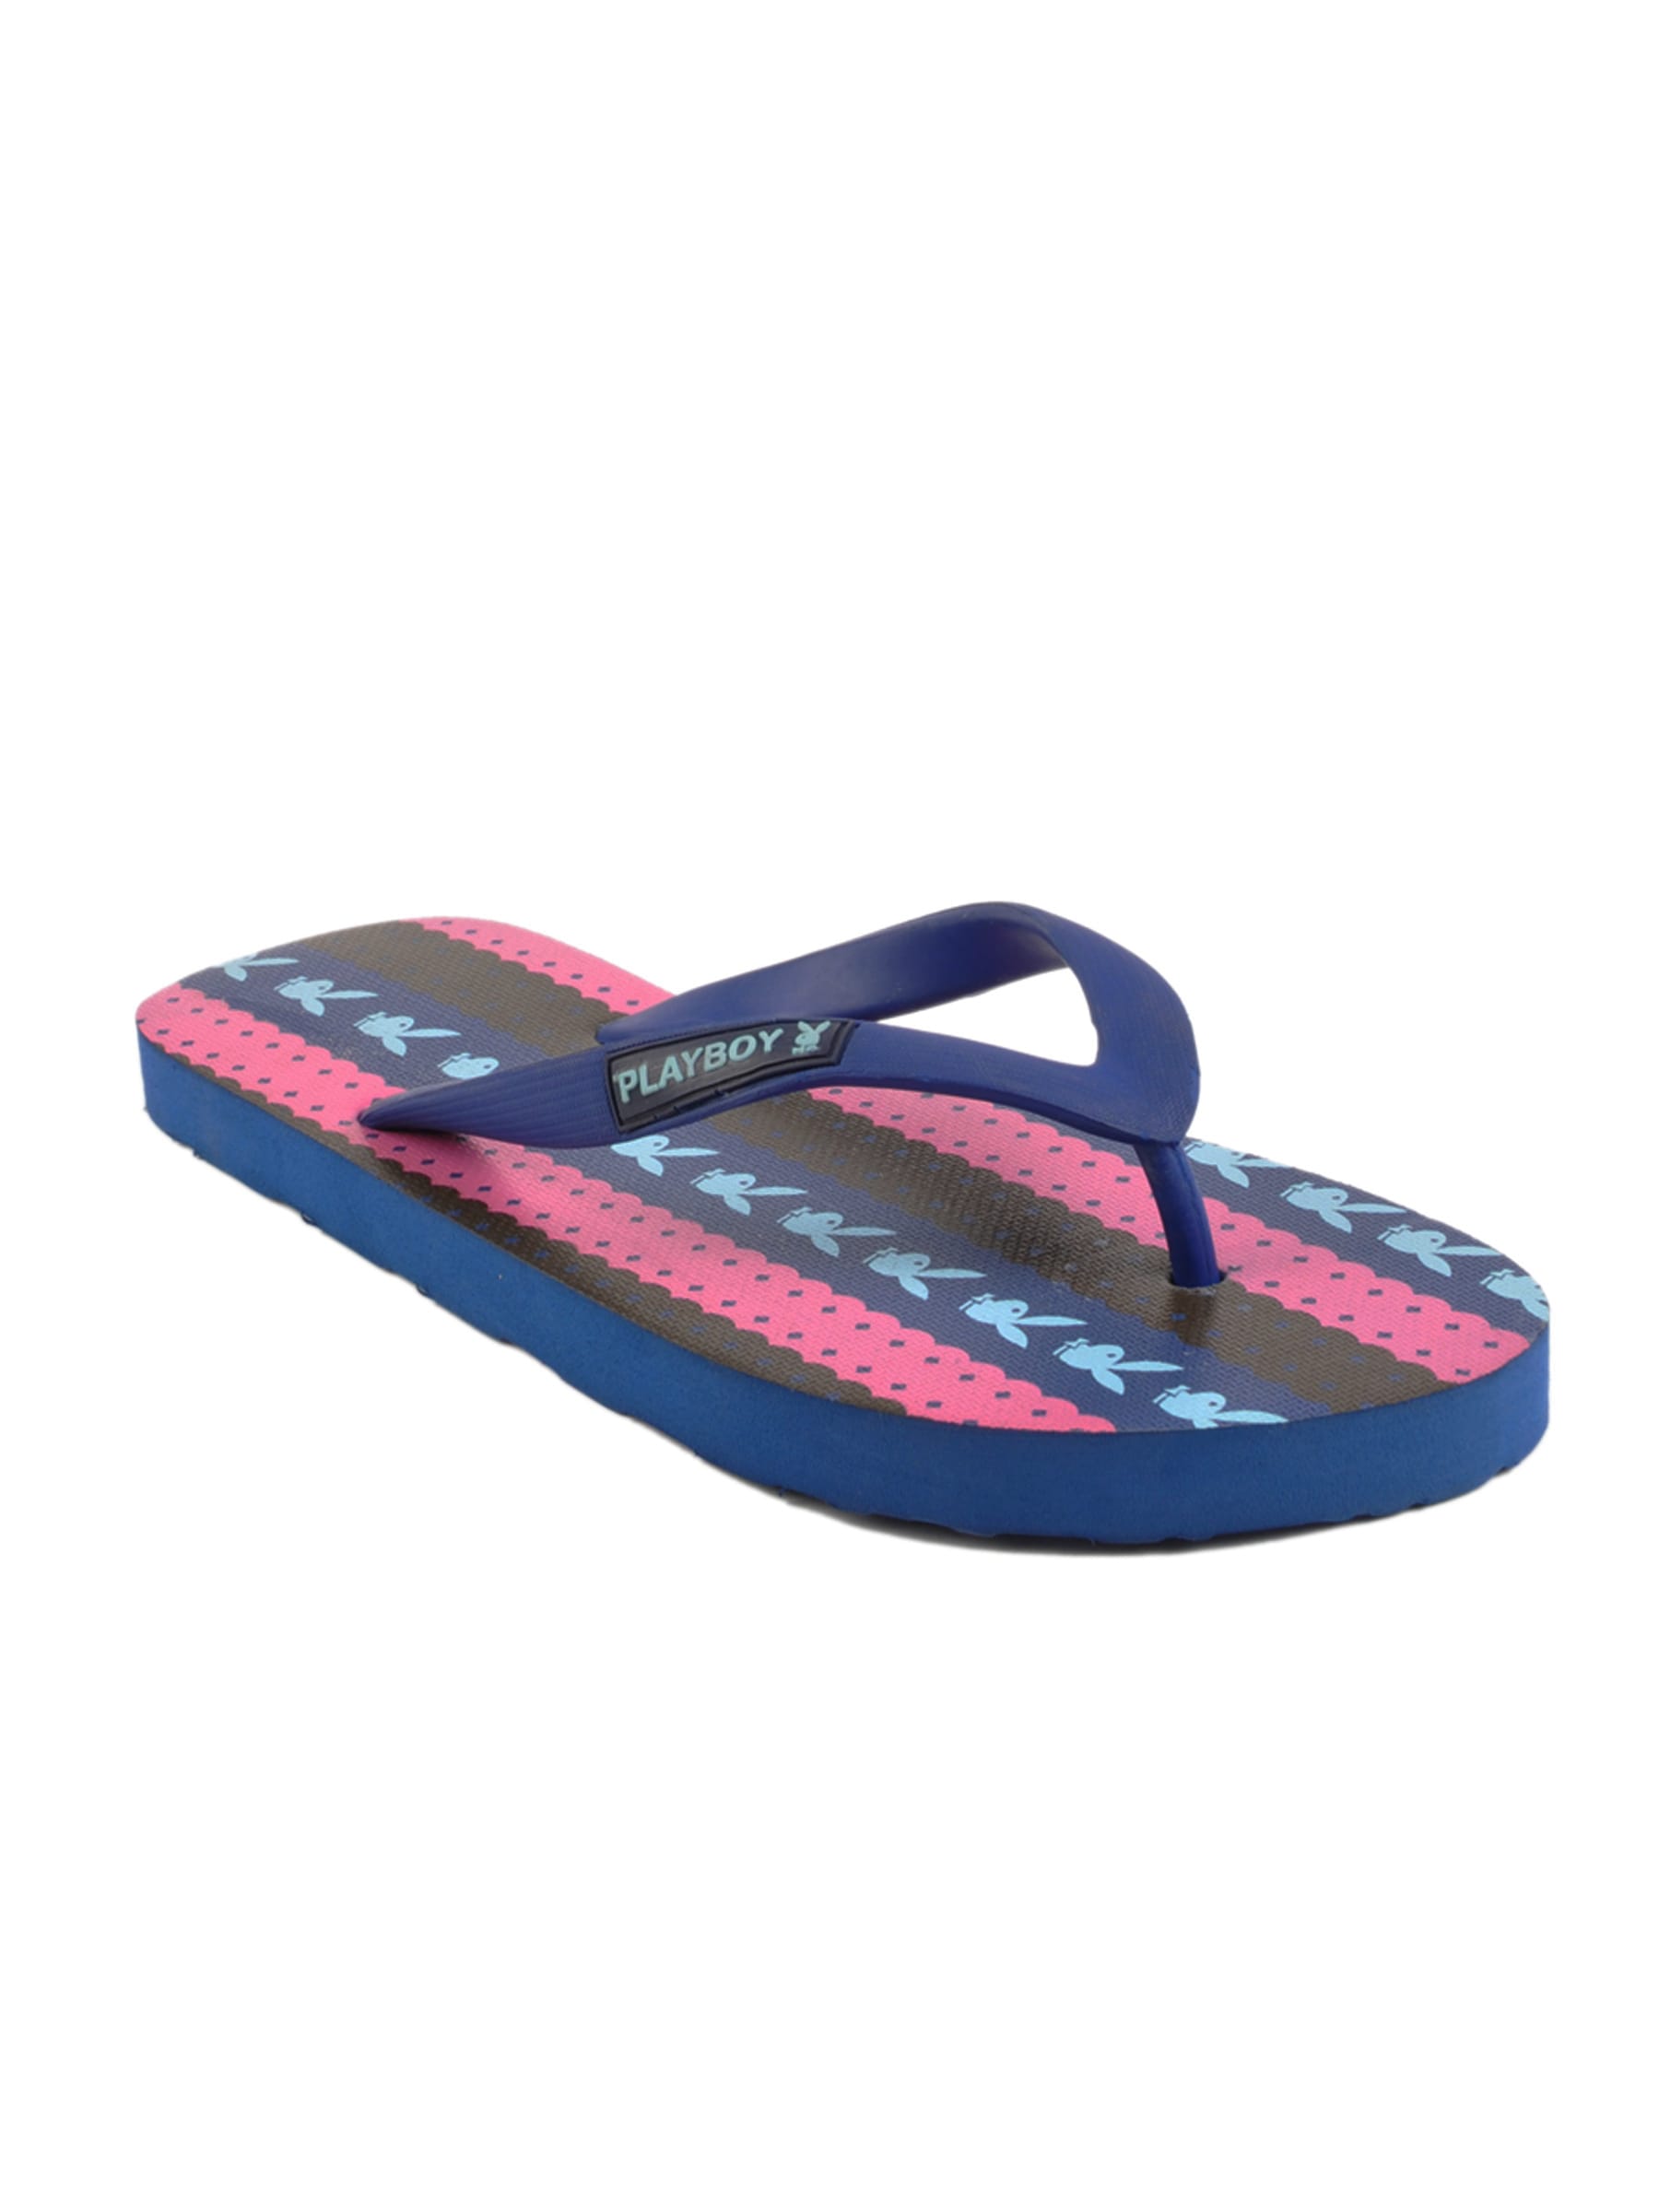 Playboy Men Casual Blue Slippers